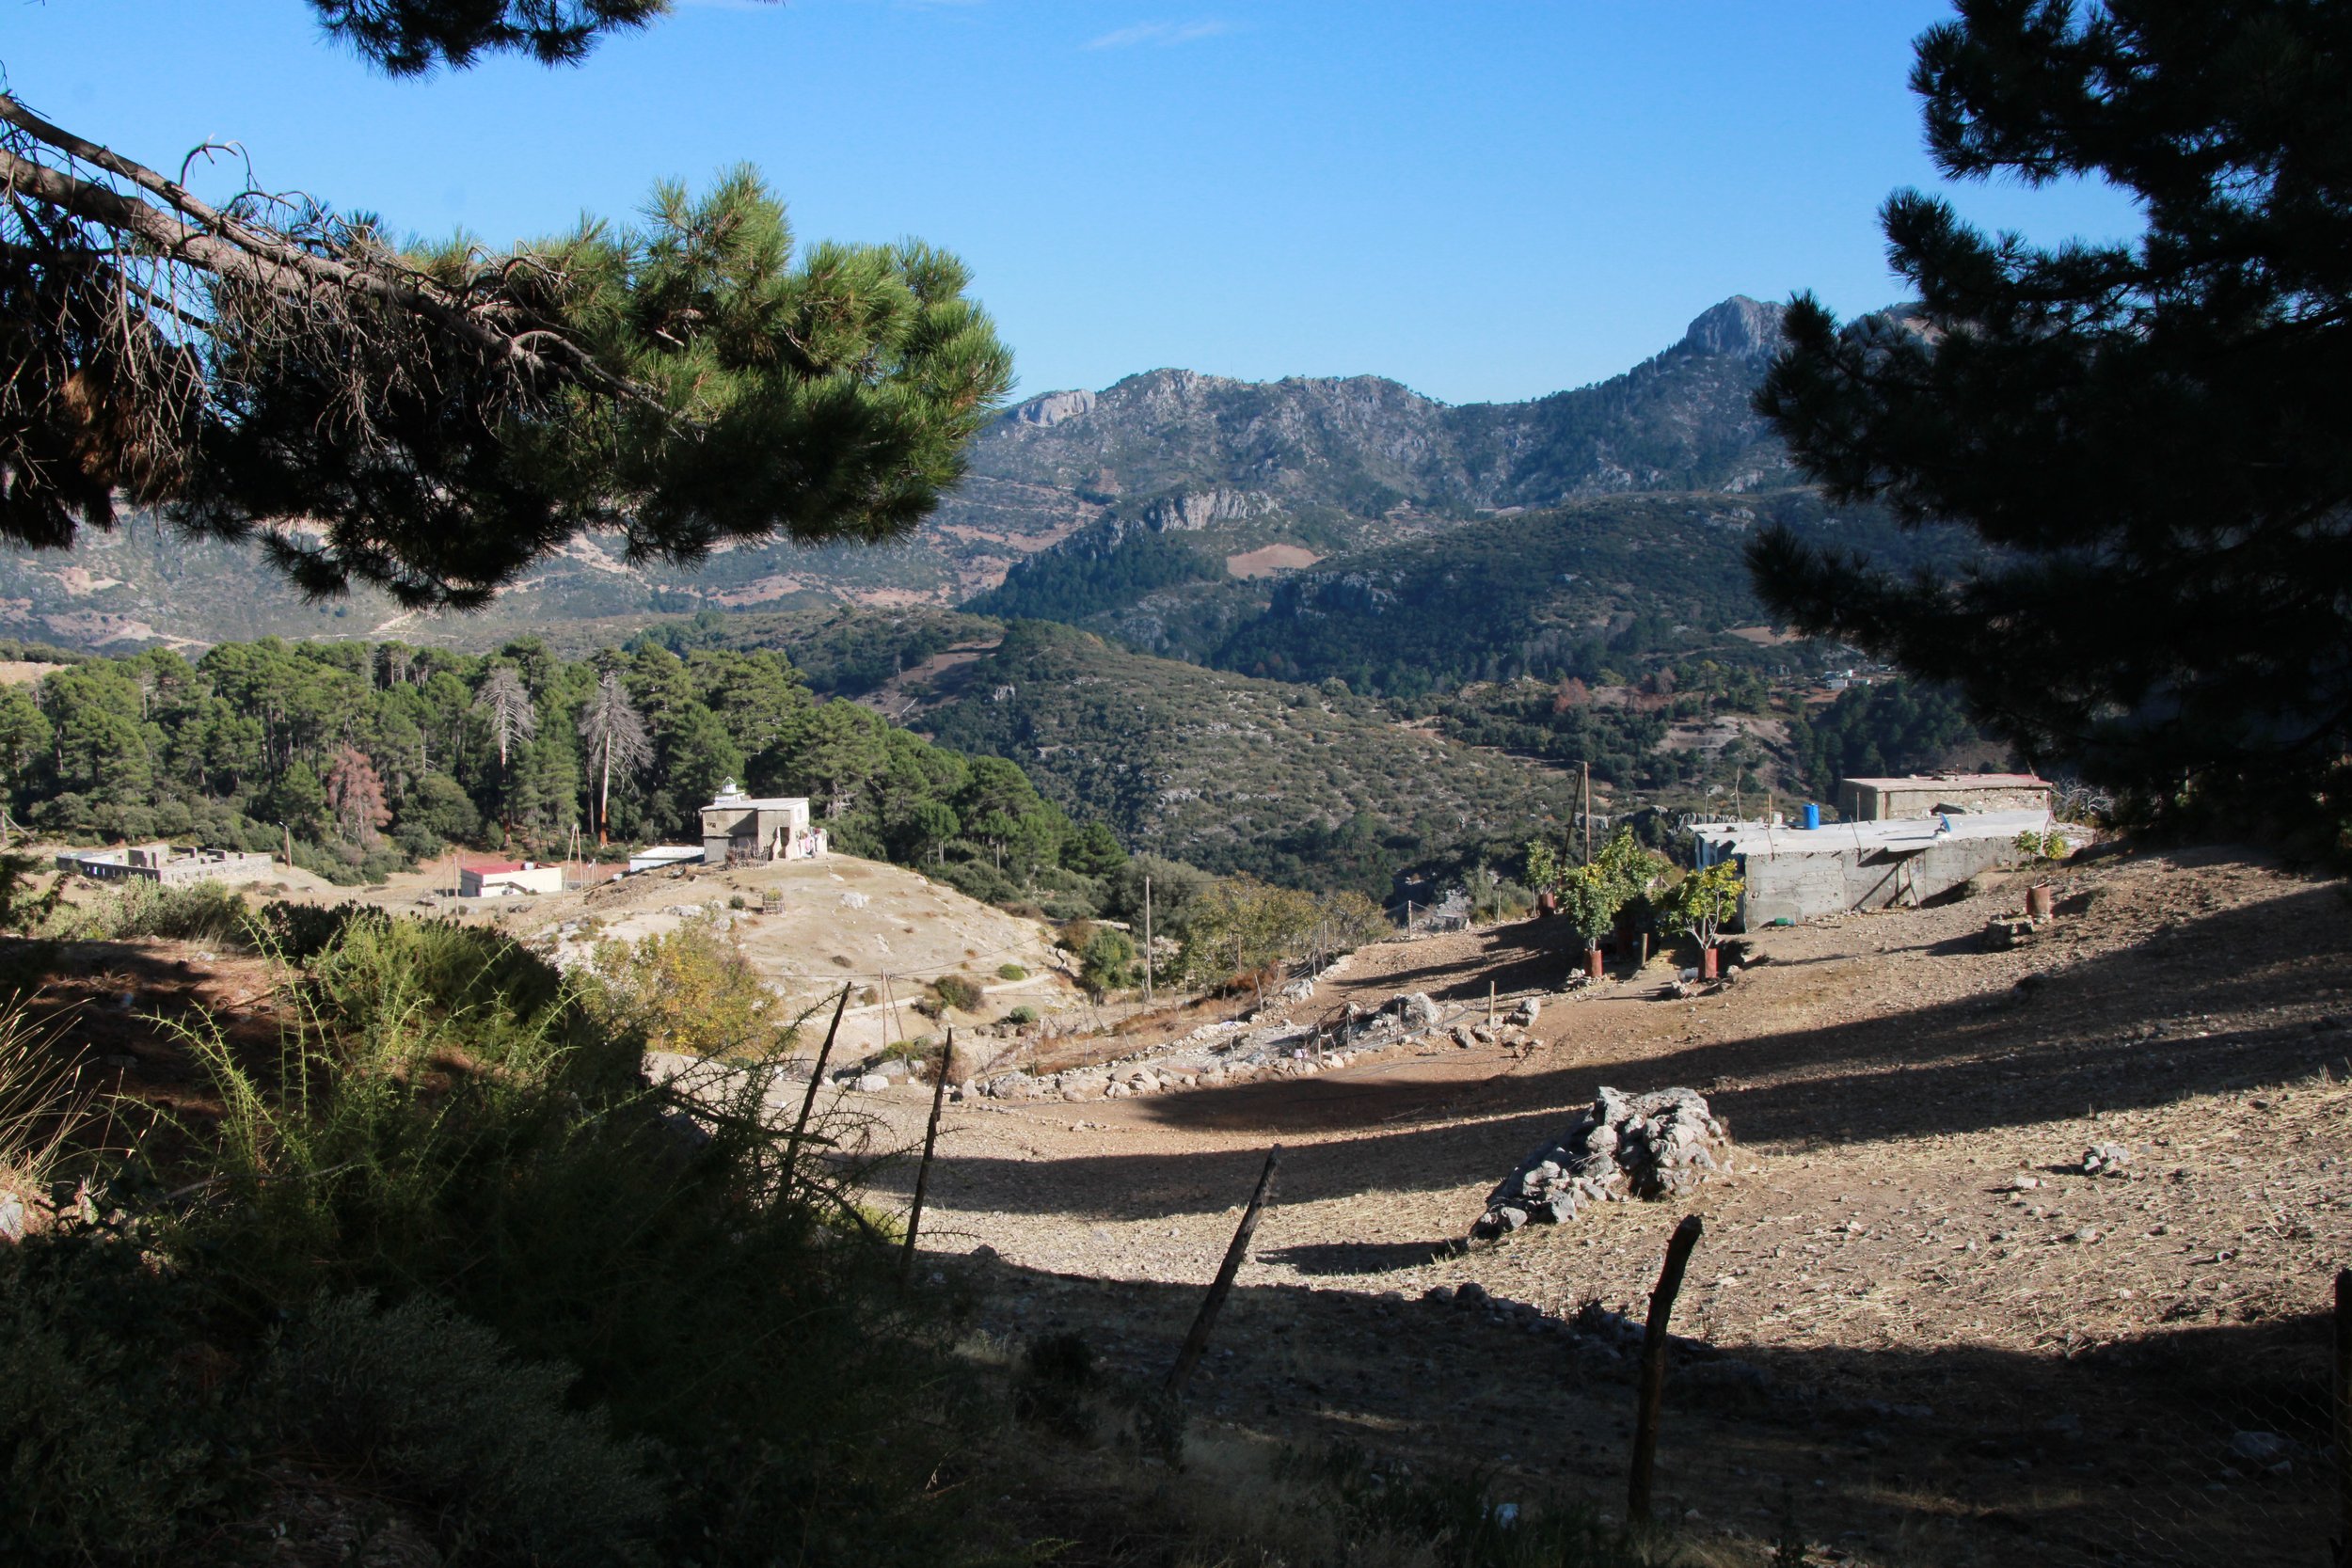   PICTURED:  A small settlement in the Rif Mountains.  PC:   Andrew Corbley © 